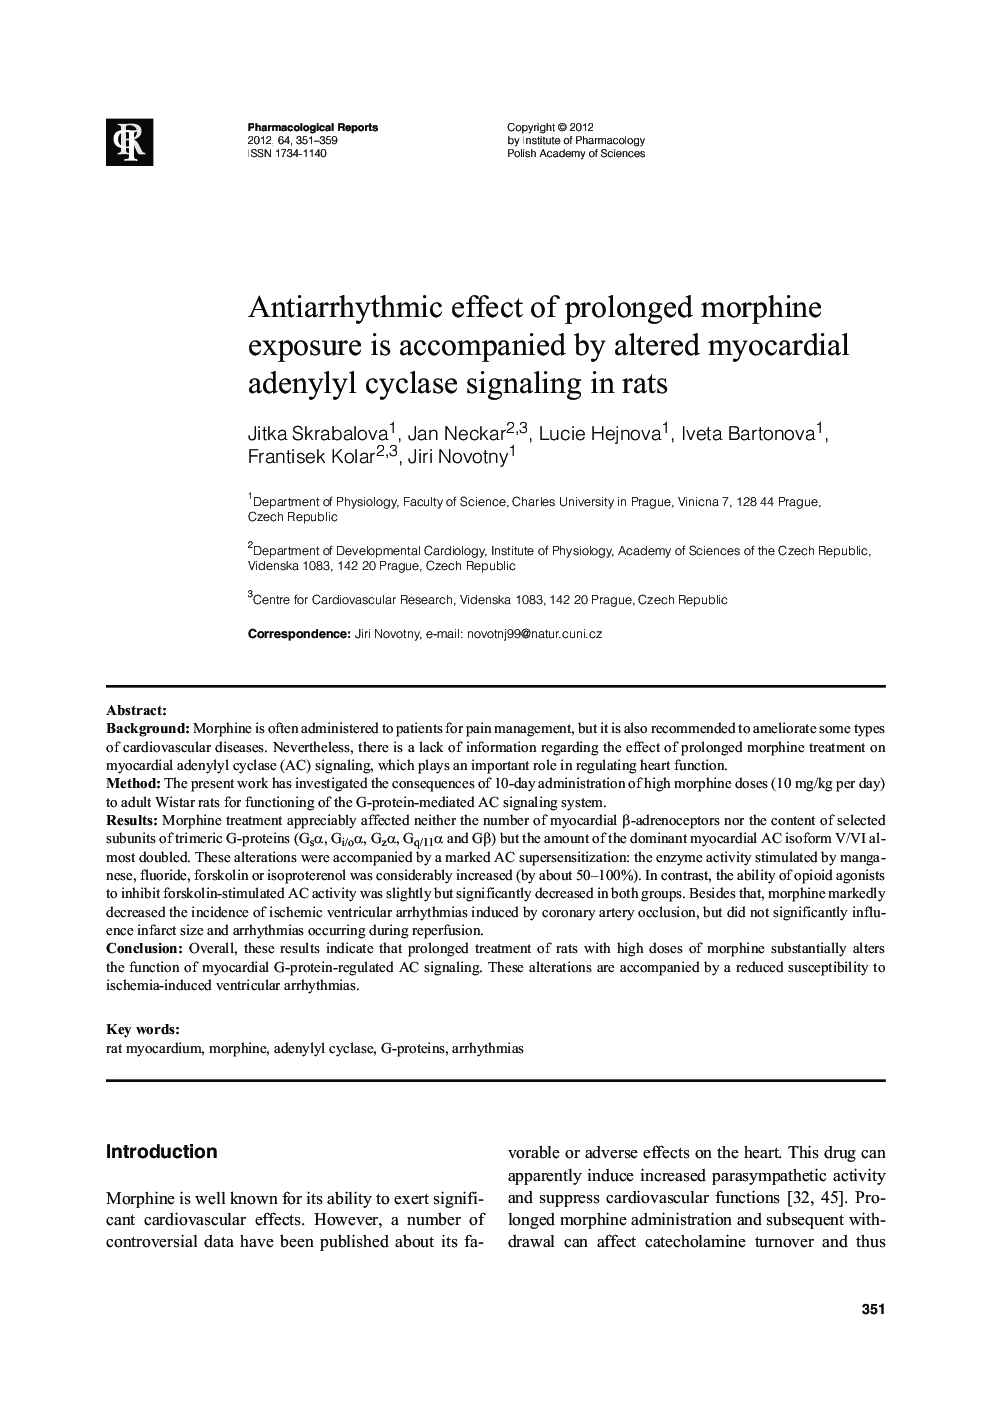 Antiarrhythmic effect of prolonged morphine exposure is accompanied by altered myocardial adenylyl cyclase signaling in rats